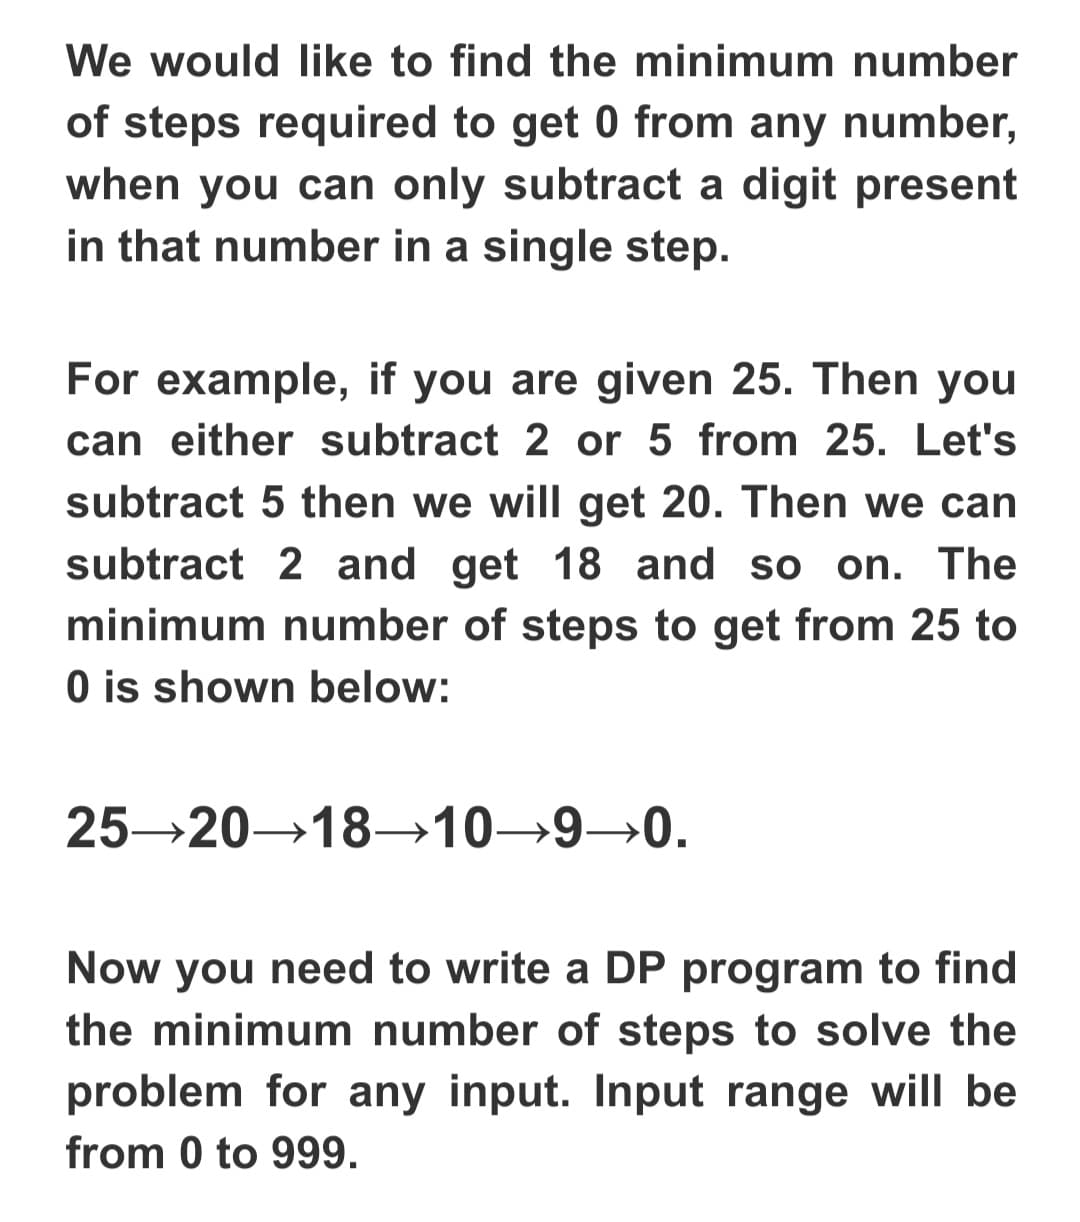 We would like to find the minimum number
of steps required to get 0 from any number,
when you can only subtract a digit present
in that number in a single step.
For example, if you are given 25. Then you
can either subtract 2 or 5 from 25. Let's
subtract 5 then we will get 20. Then we can
subtract 2 and get 18 and so on. The
minimum number of steps to get from 25 to
O is shown below:
25 20→18→10→9→0.
Now you need to write a DP program to find
the minimum number of steps to solve the
problem for any input. Input range will be
from 0 to 999.
